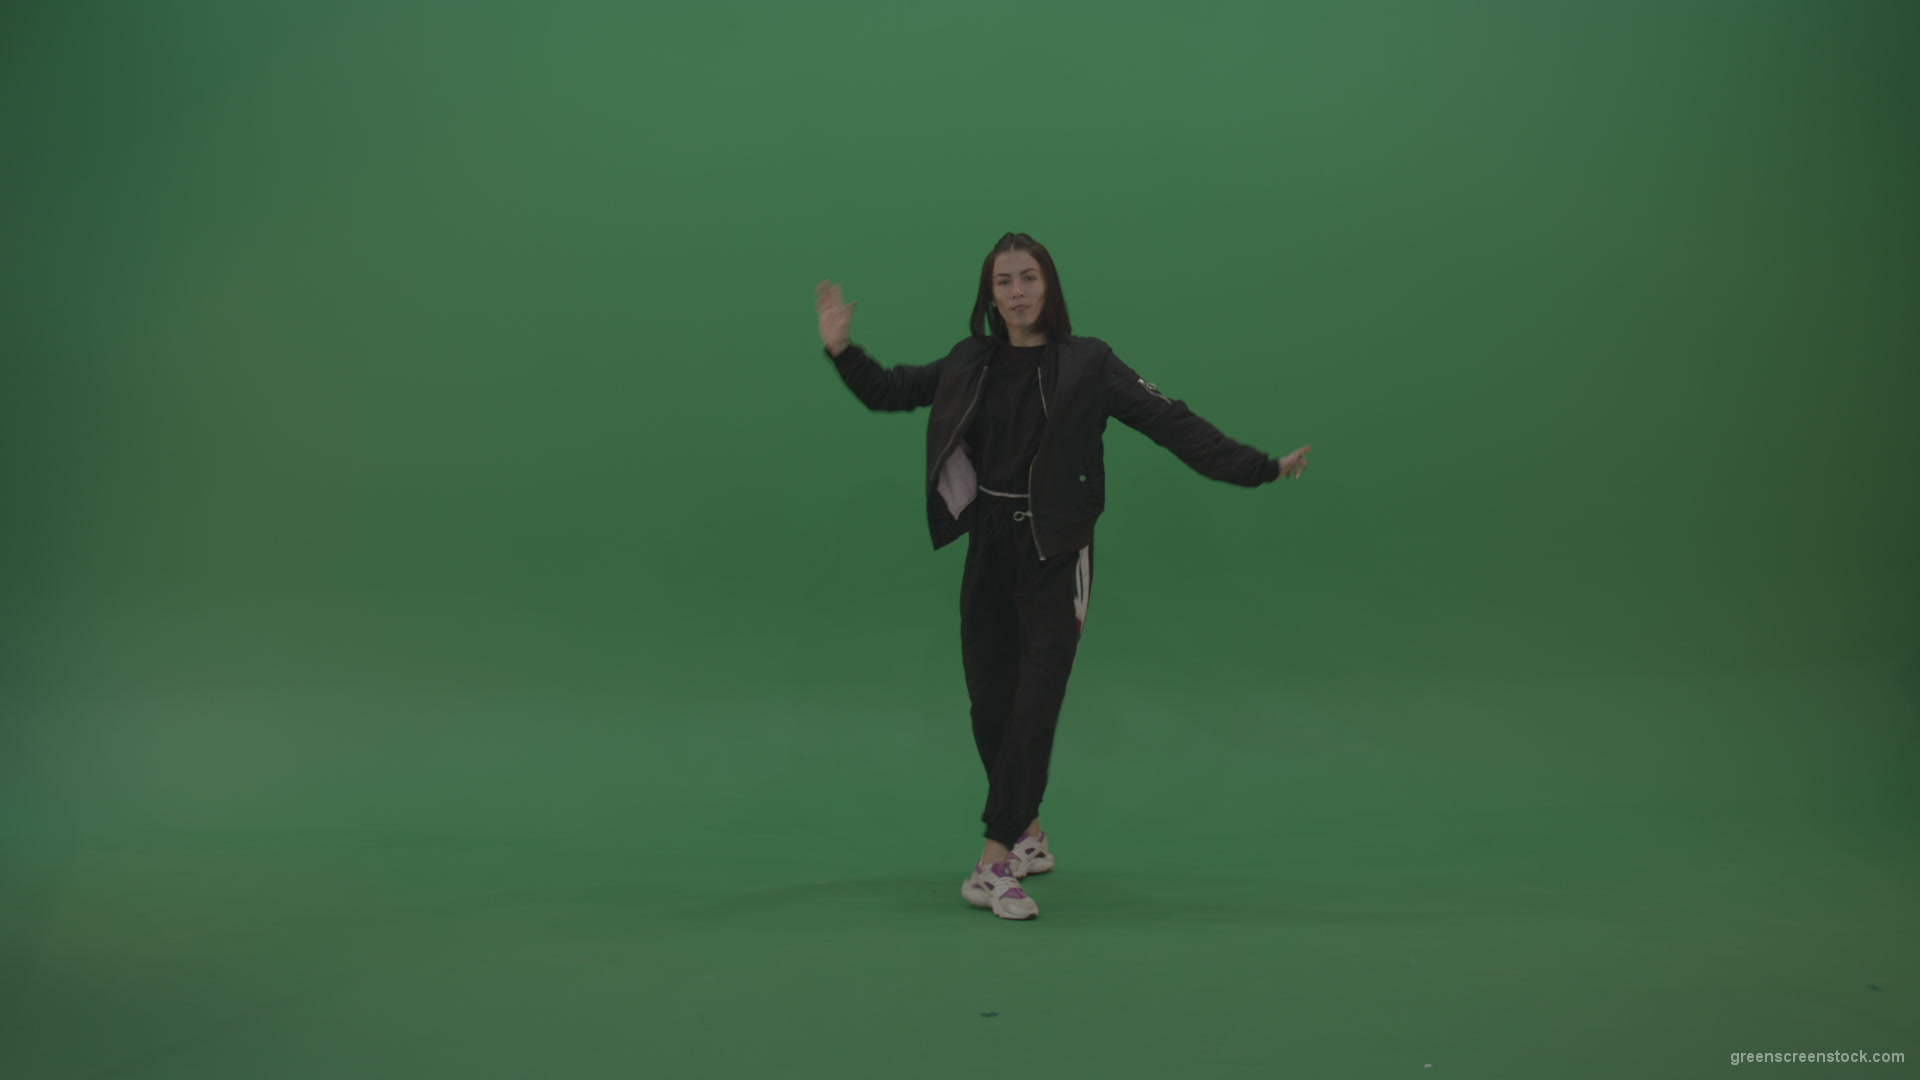 Incredible_Dance_Hip_Hop_Moves_From_Young_Brunette_Female_Wearing_Black_Sweat_Suite_And_White_Trainers_On_Green_Screen_Wall_Background_008 Green Screen Stock